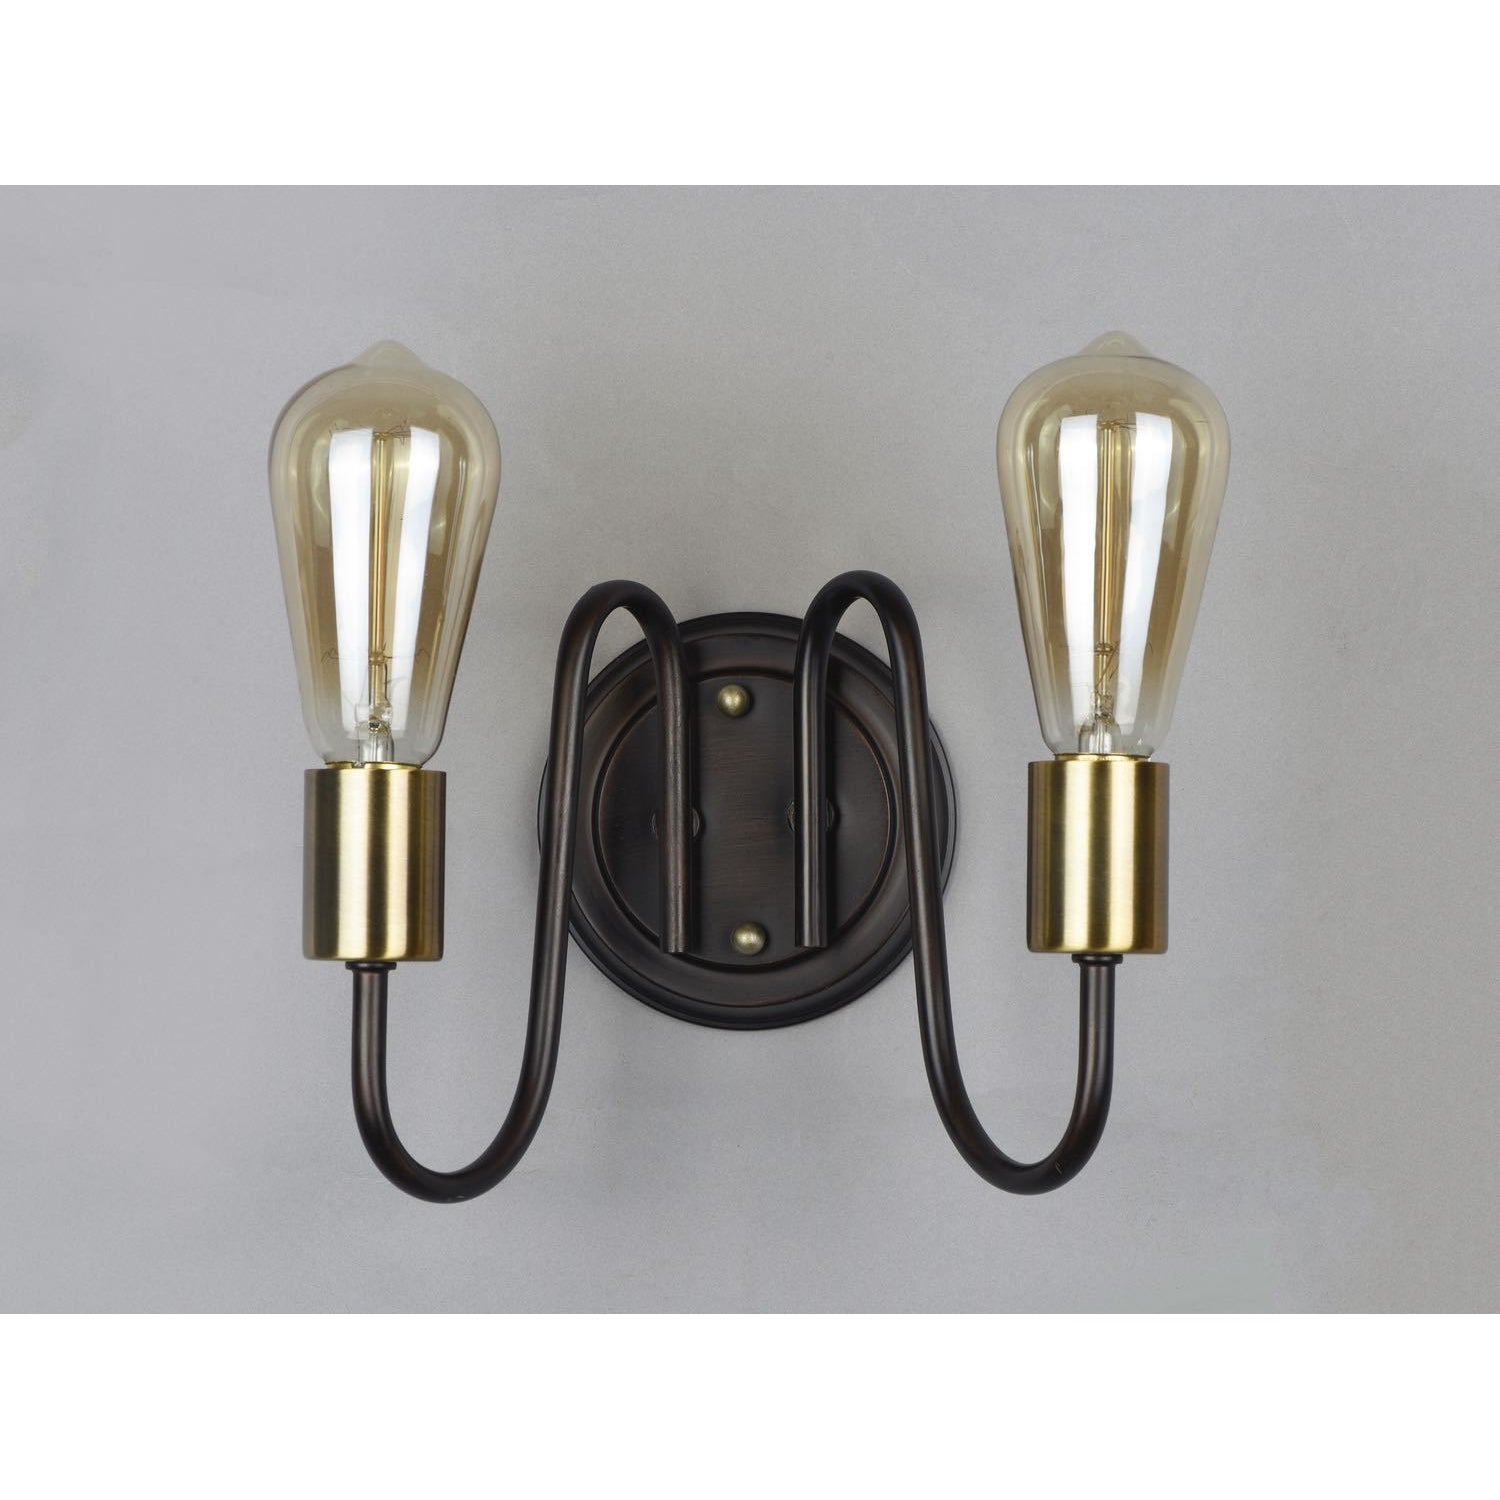 Haven Sconce Oil Rubbed Bronze / Antique Brass